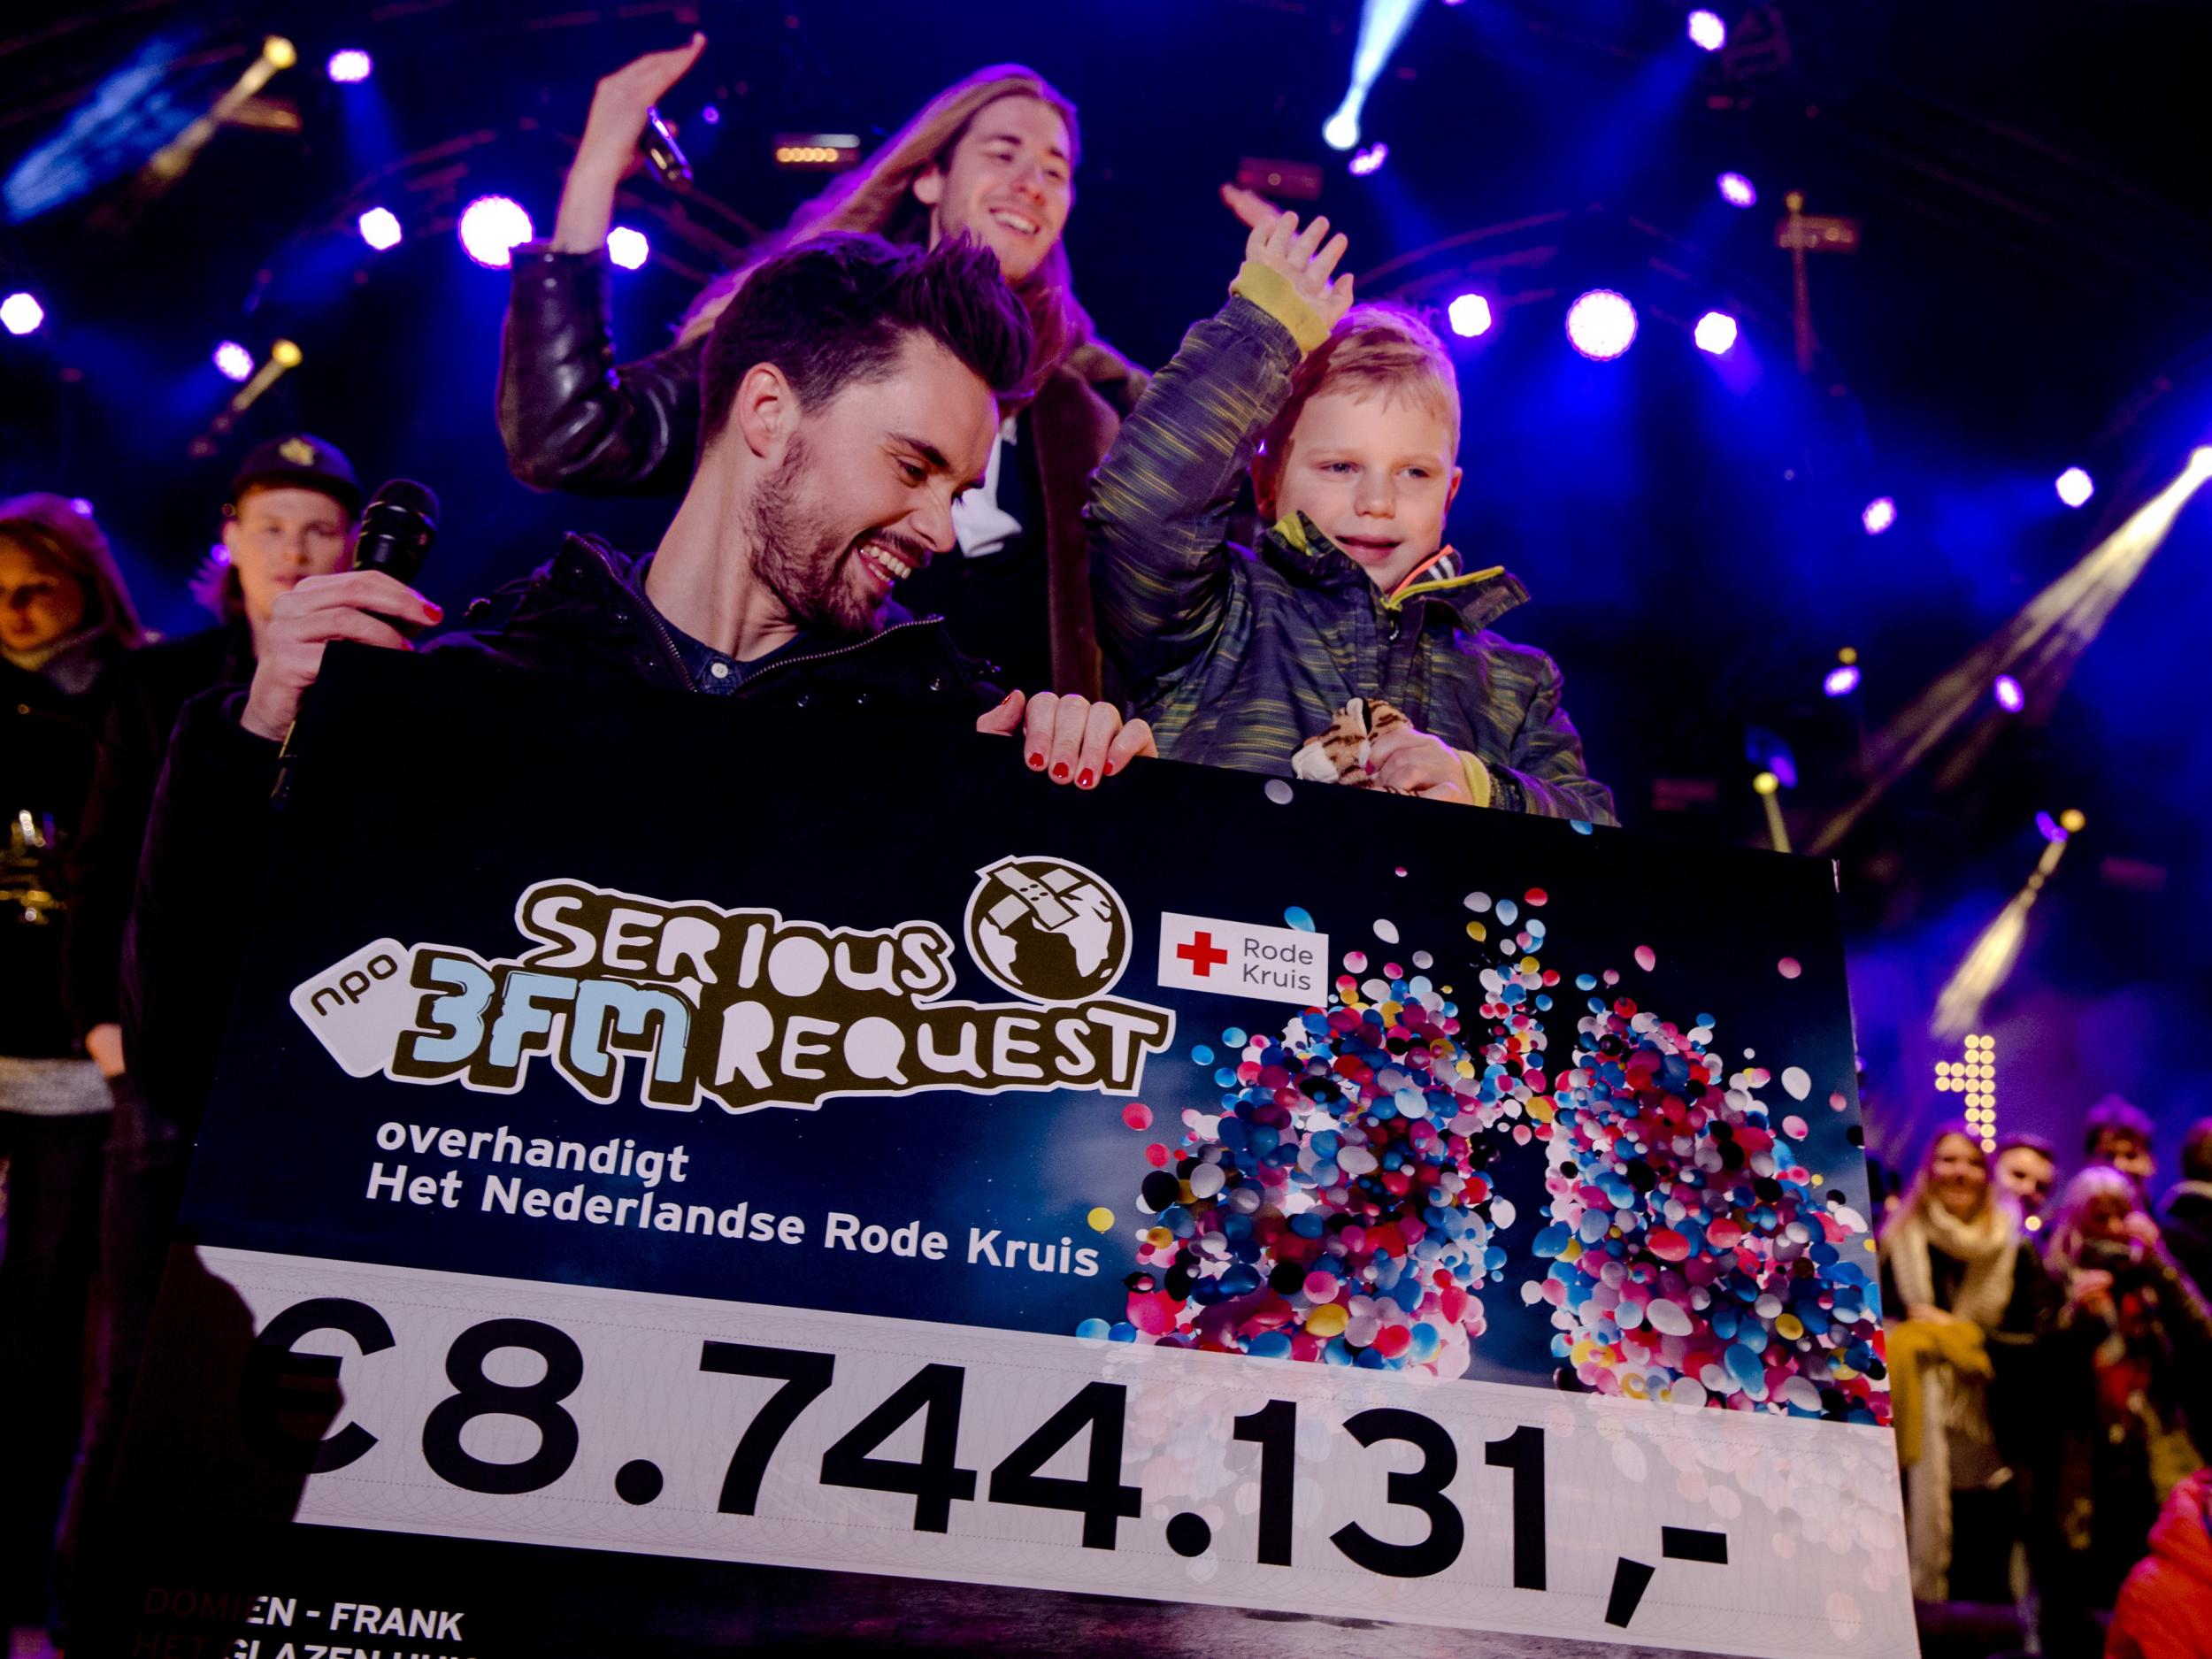 Dutch radio DJ's and 6-year-old Tijn Kolsteren show the combined total amount of money (8,744,131 euros) they raised